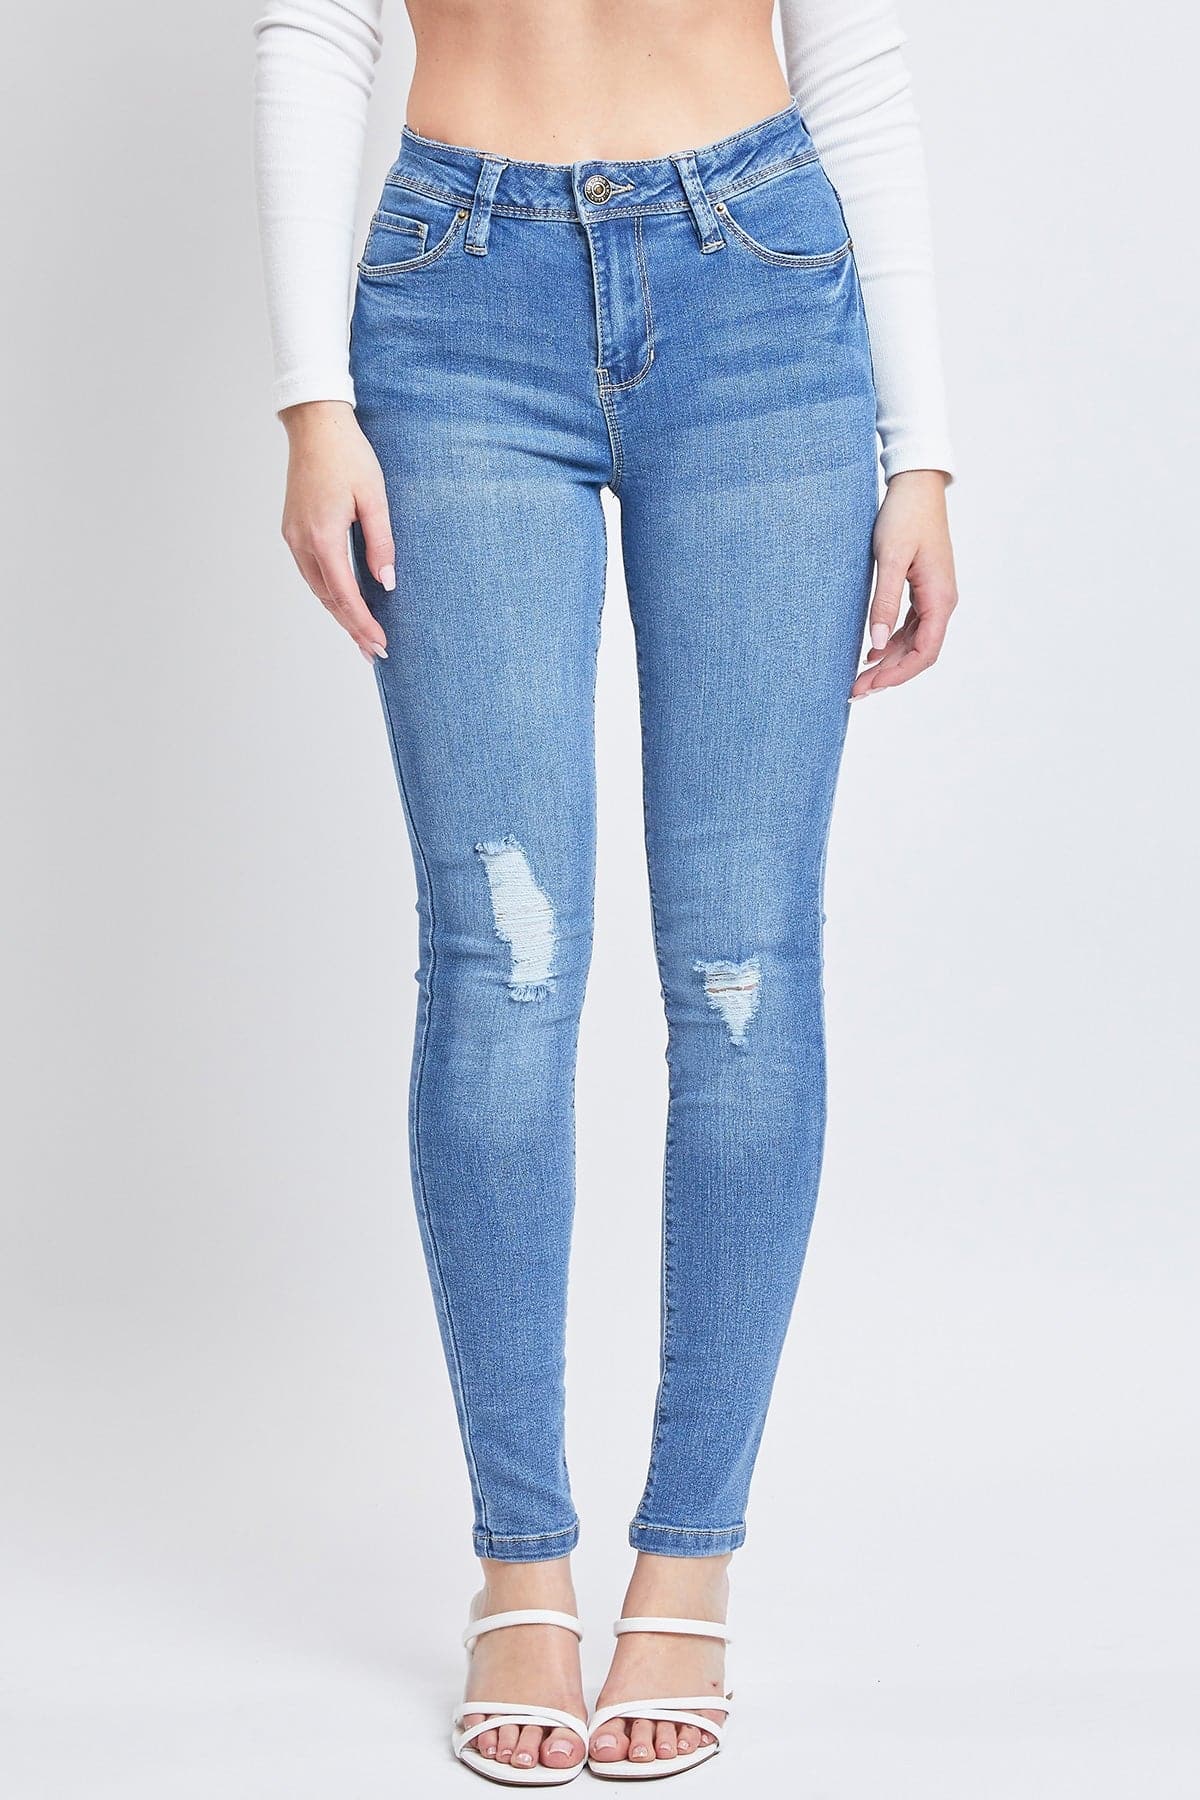 Women's Essential Sustainable Distressed Skinny Jeans